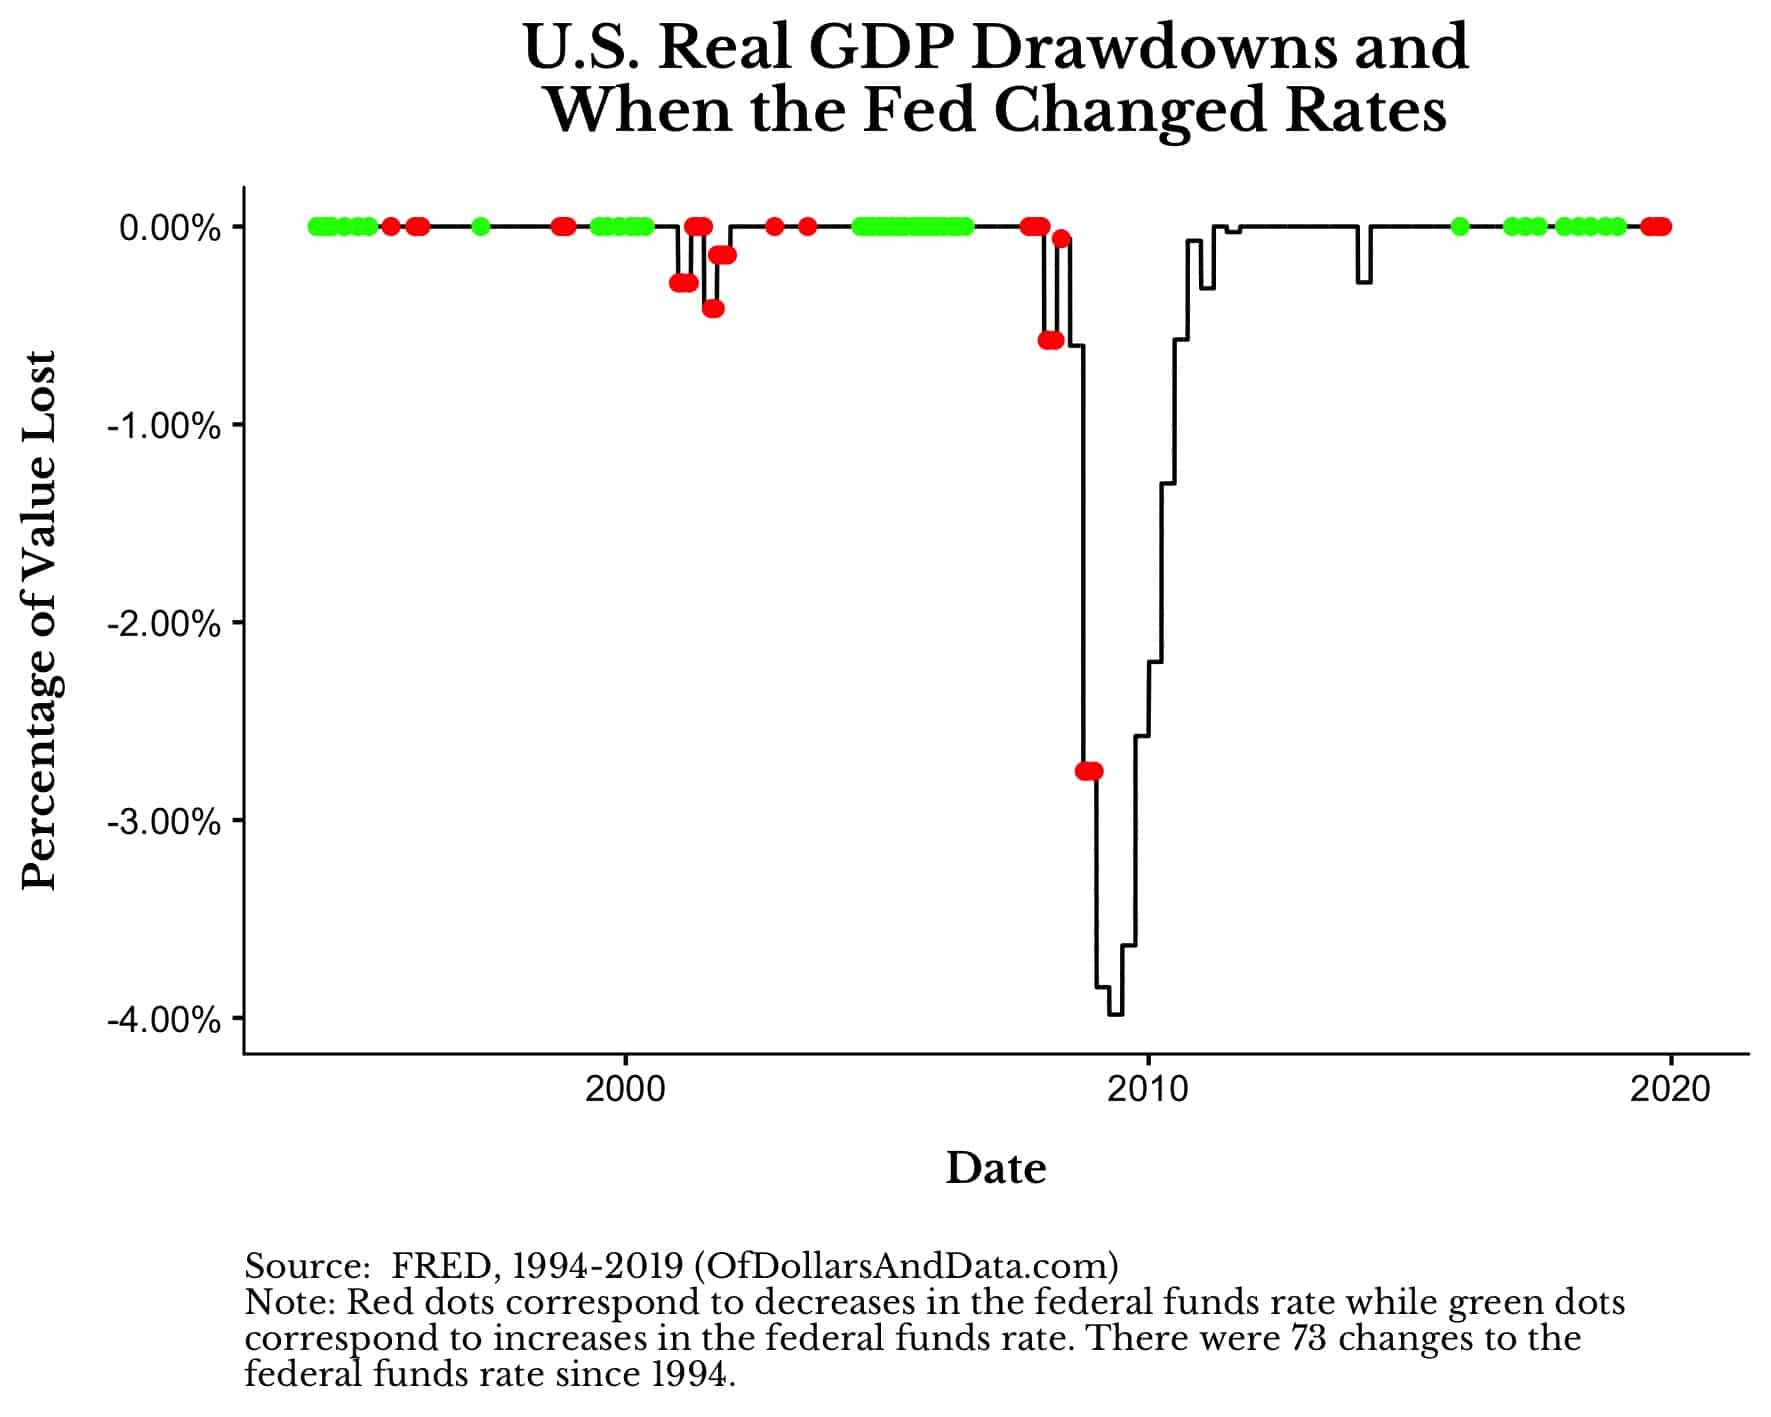 US Real GDP drawdowns and when the Fed changed rates